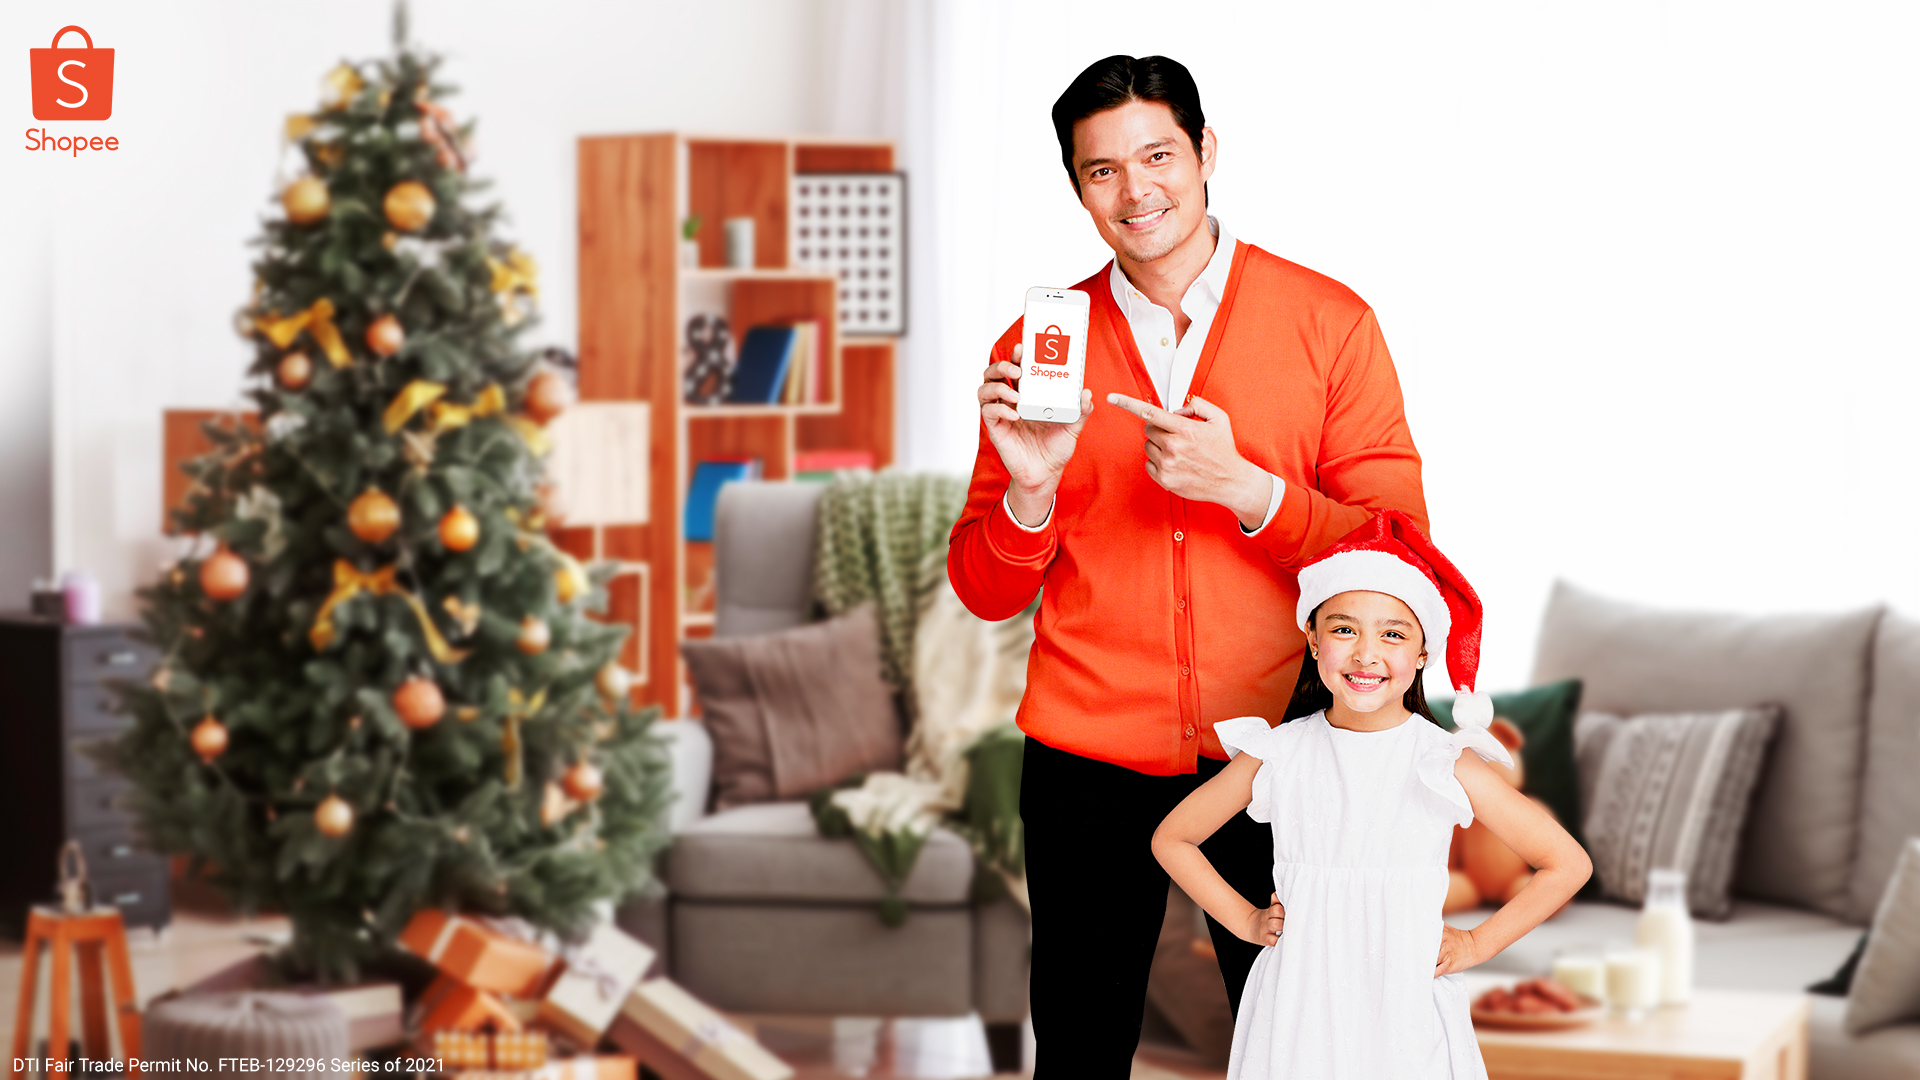 Shopee Brand Ambassadors Dingdong and Zia Dantes share what’s on their wishlist this Christmas